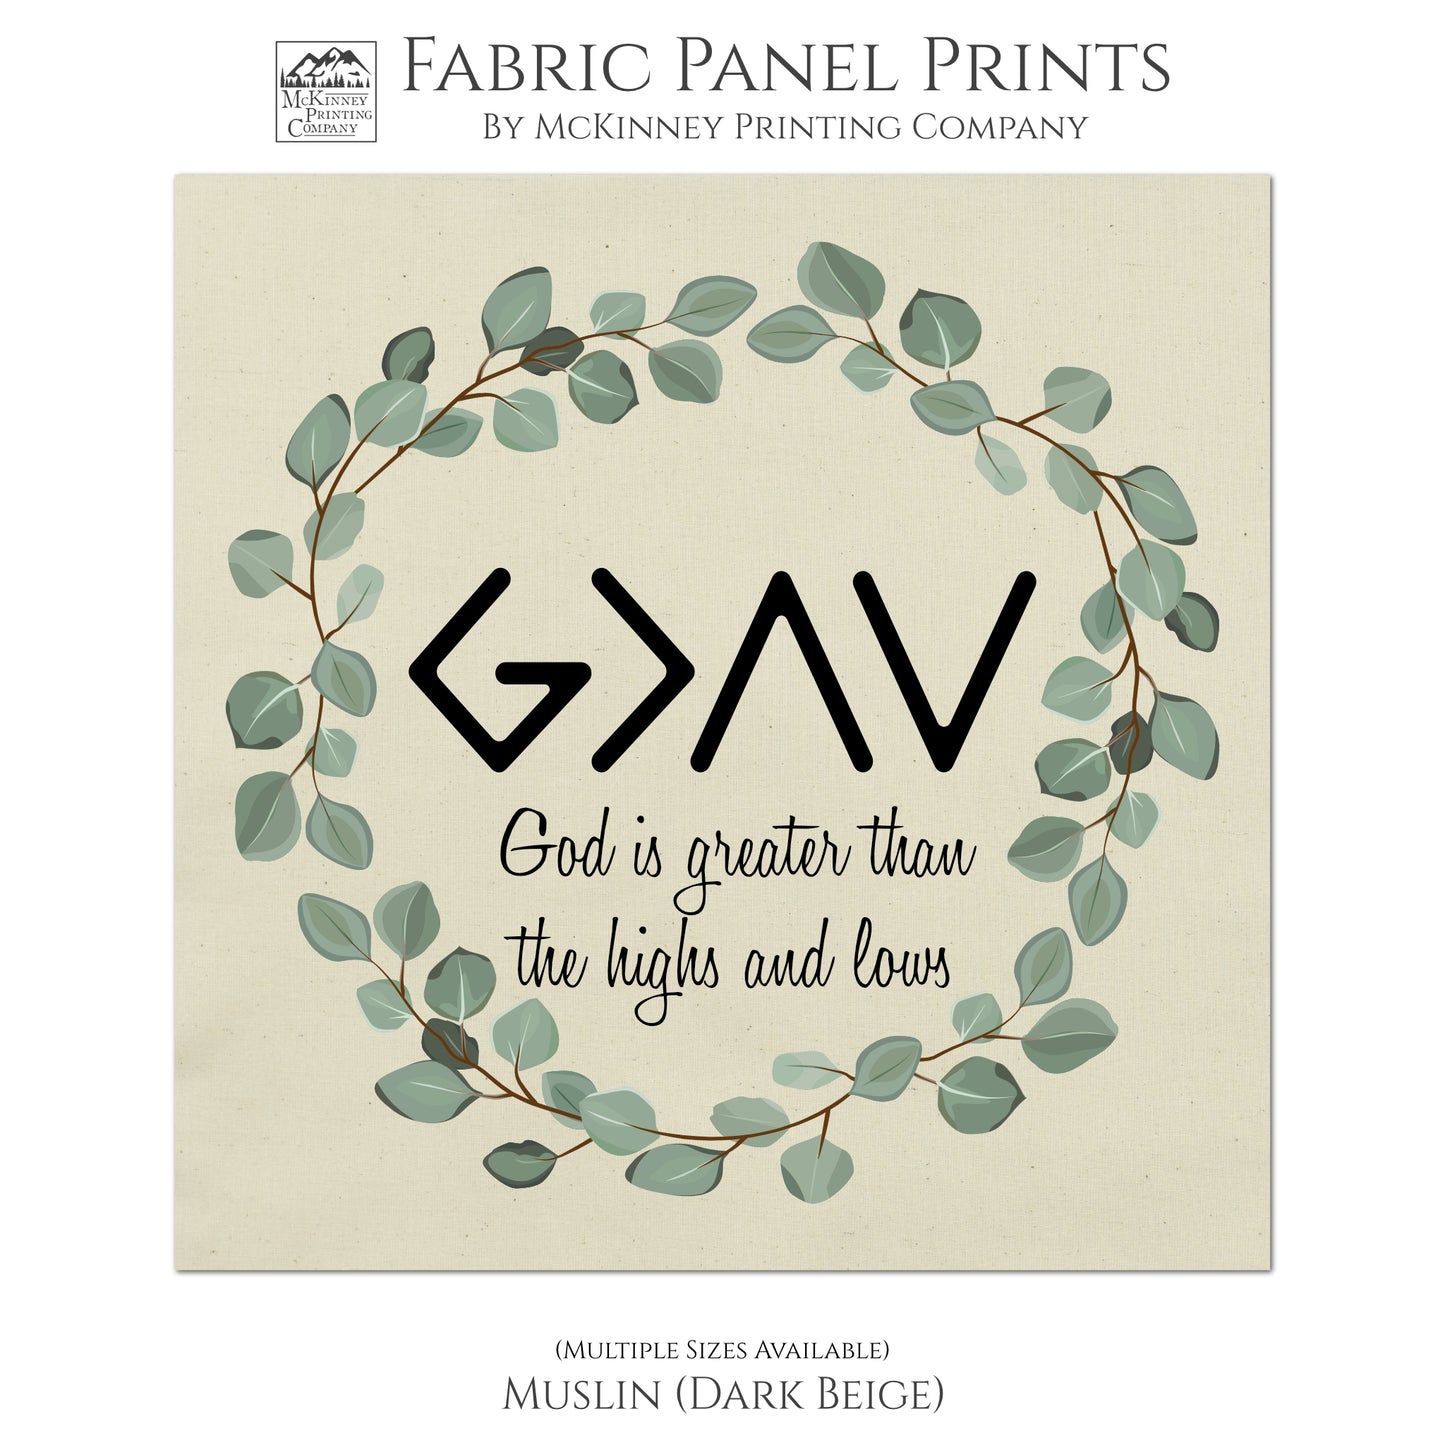 God is Greater than the Highs and Lows - Religious Fabric, Christian, Quilt Block, Wall Art - Quilting, Crafts, Pillow, Towel, Muslin